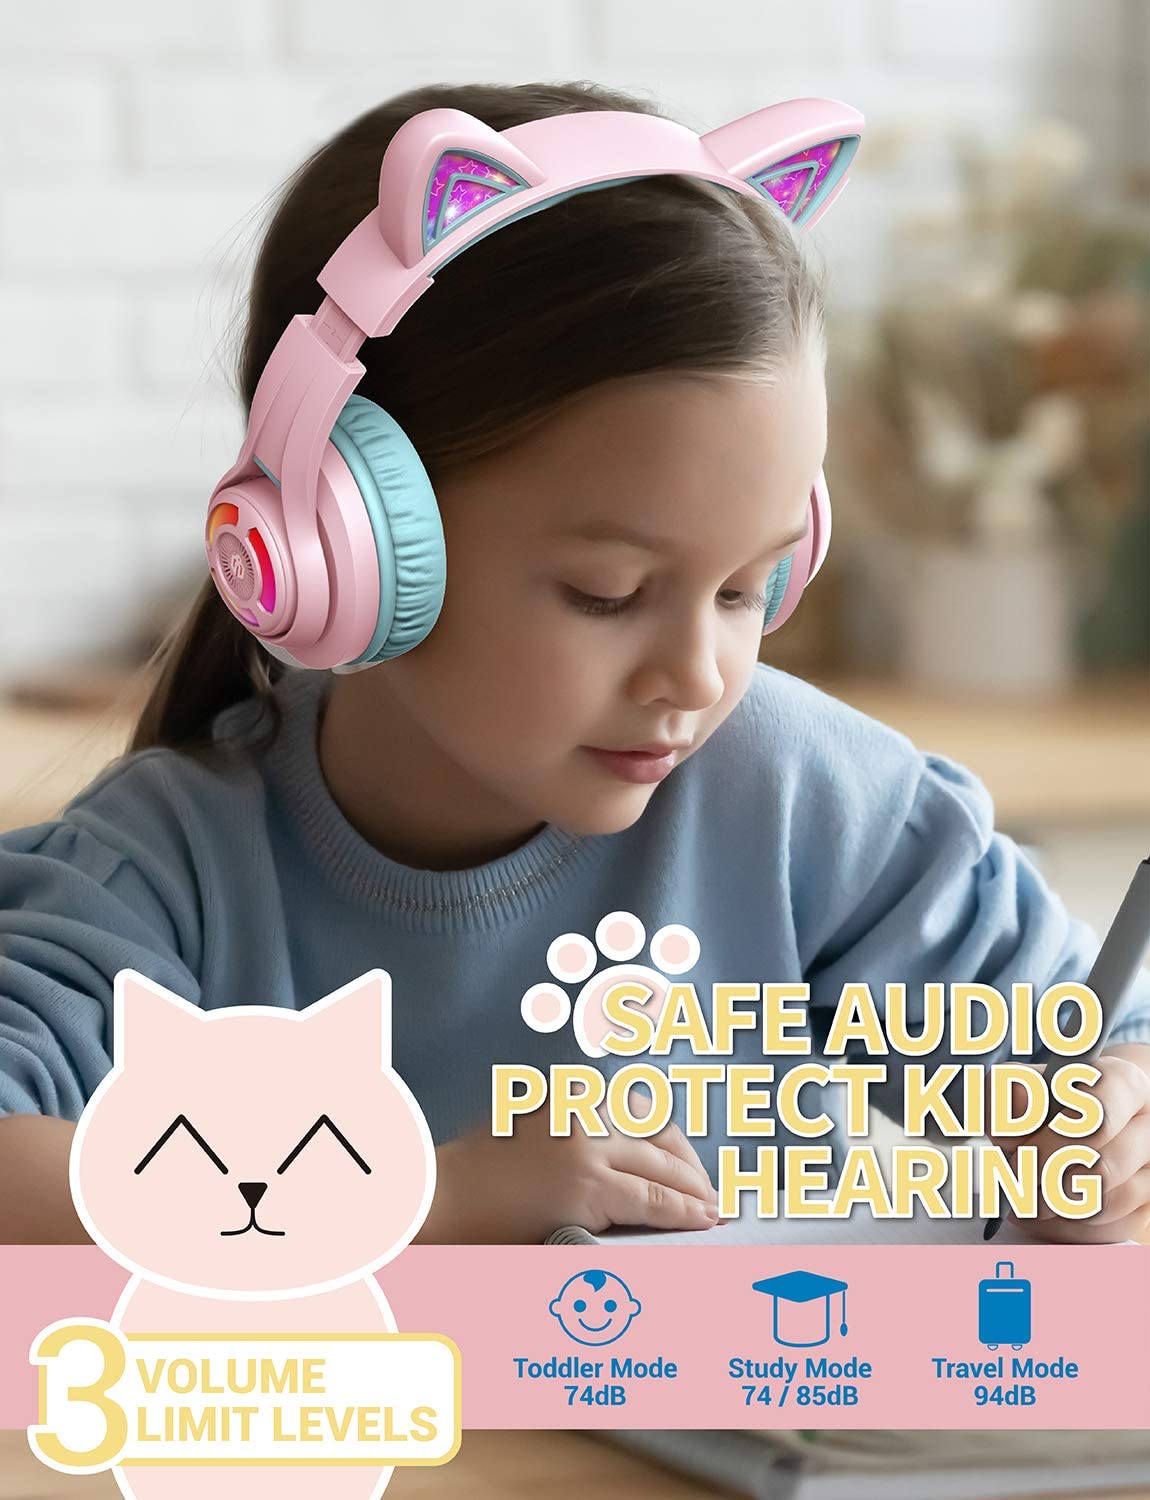 iClever BTH13 Bluetooth 5.0 Headphones with 3 setting Volume Limiter Features and up to 45H Playtime for Kids 3-16yrs old C04-2083N-01